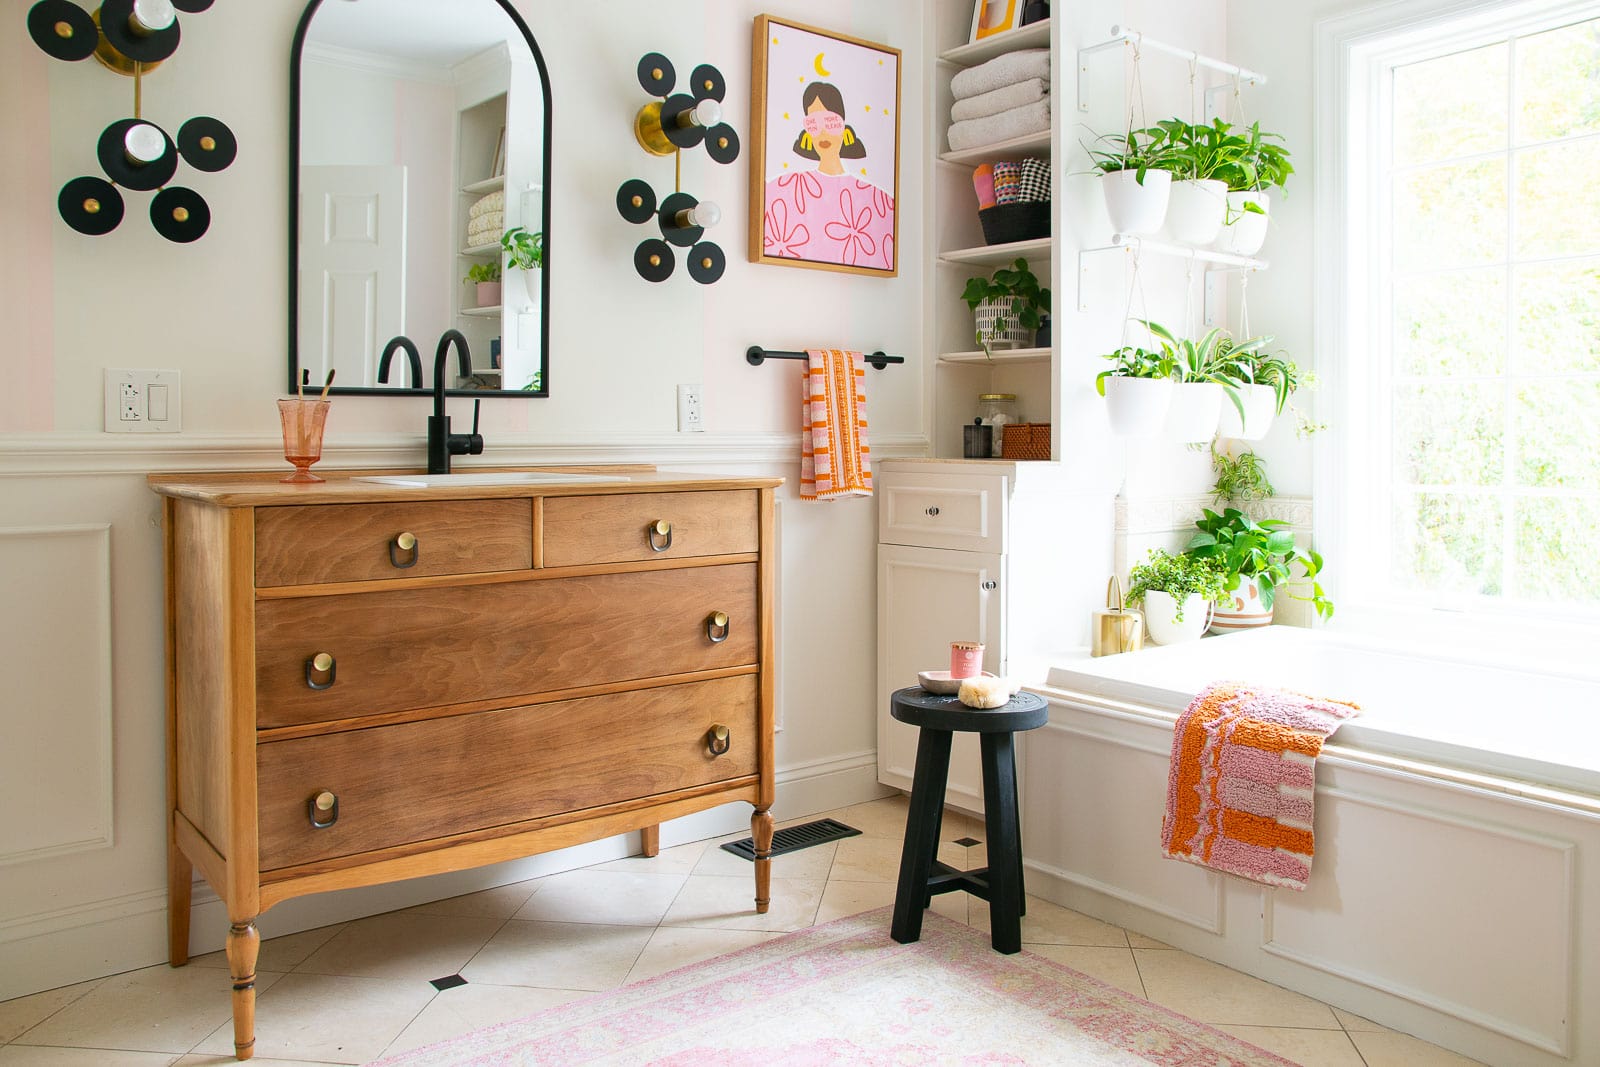 How to Turn a Vintage Dresser into a Bathroom Vanity - At Charlotte's House